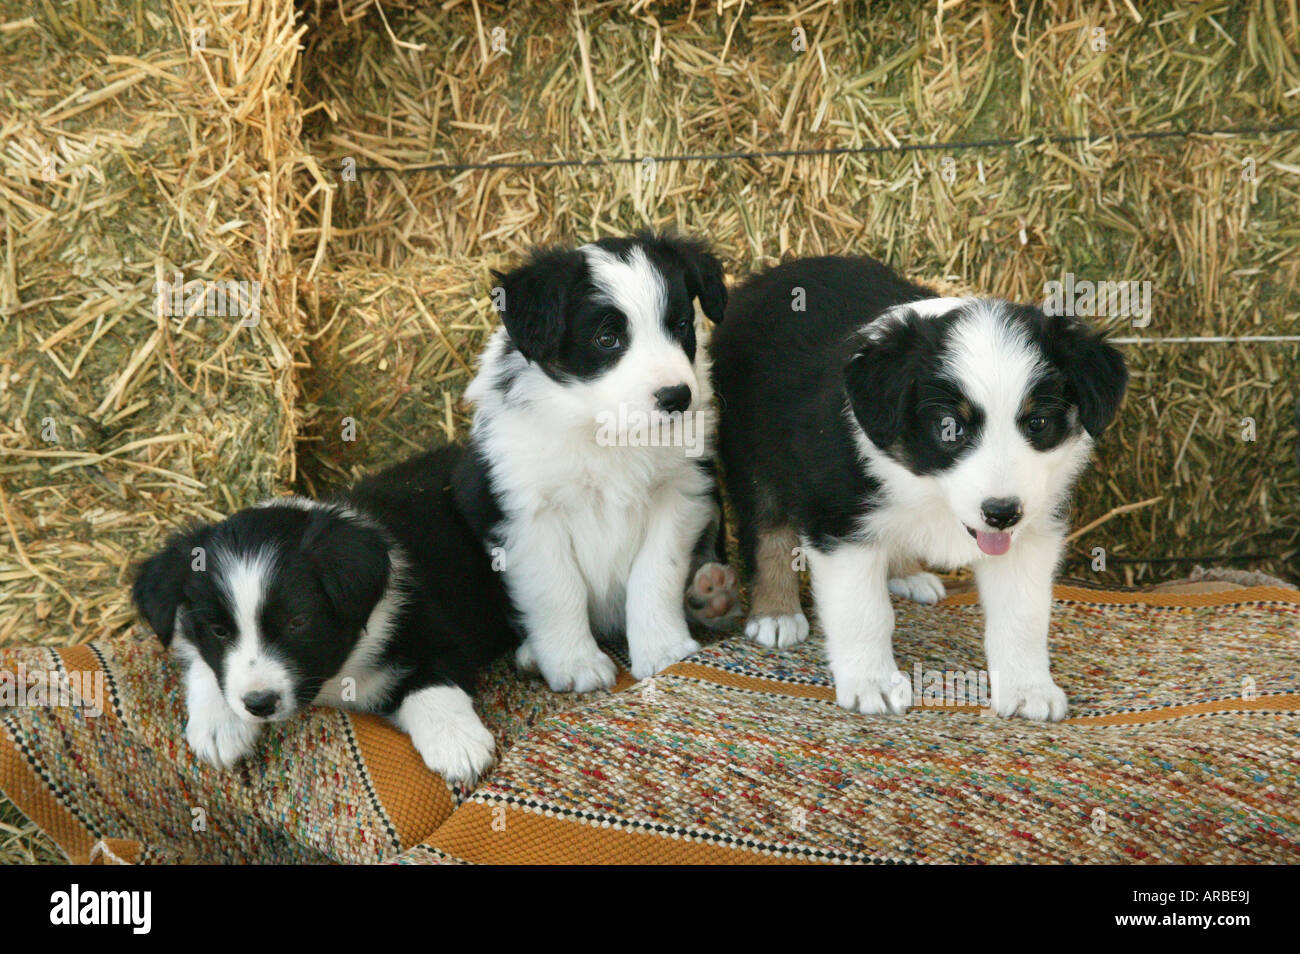 Border Collie Puppies on saddle blanket, cattle ranch. Stock Photo